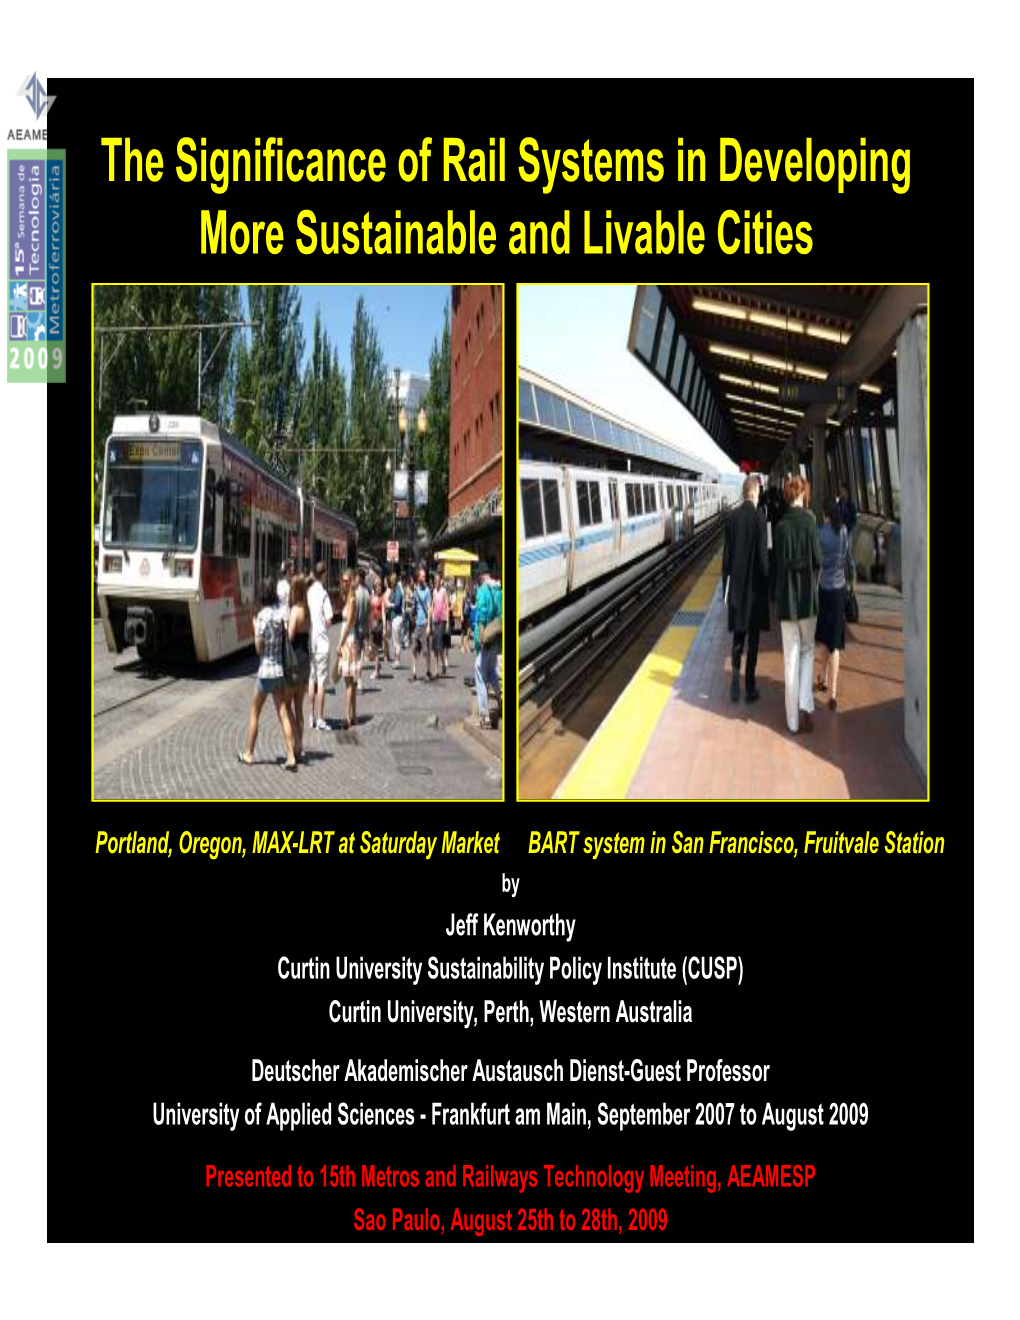 The Significance of Rail Systems in Developing More Sustainable and Livable Cities